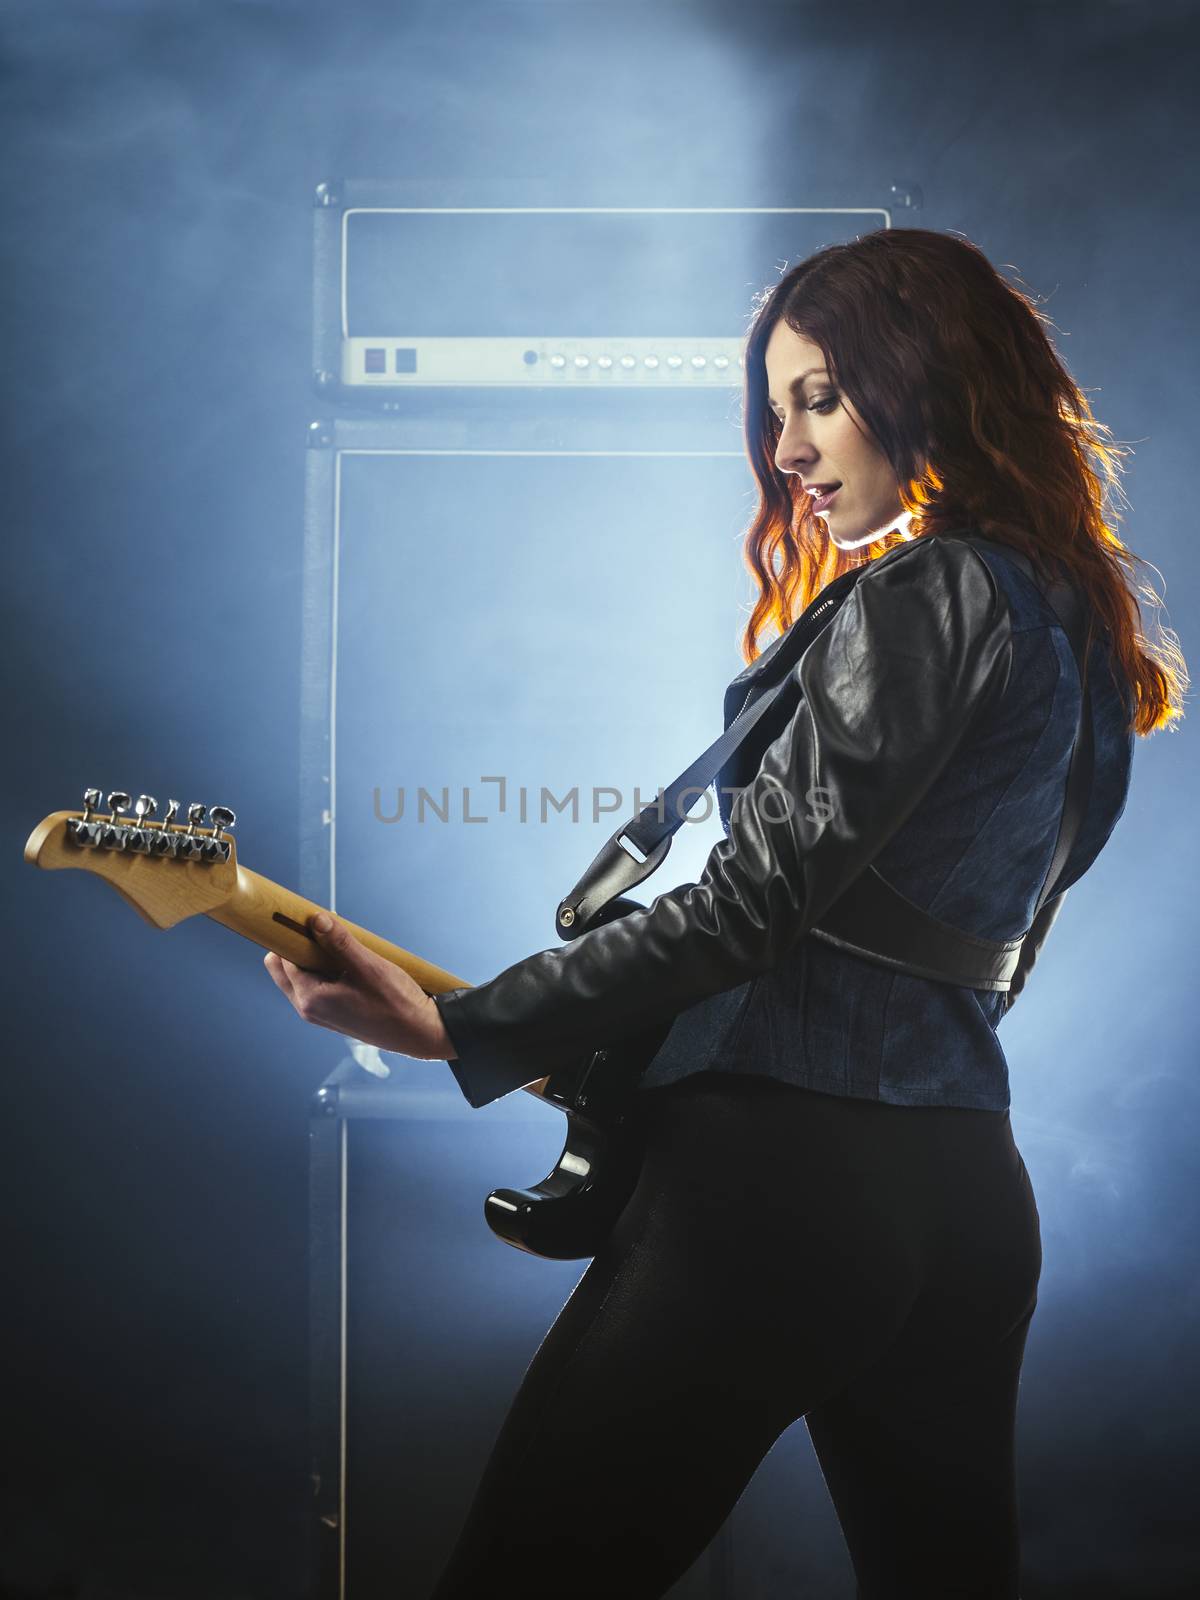 Beautiful woman with red hair playing electric guitar by sumners